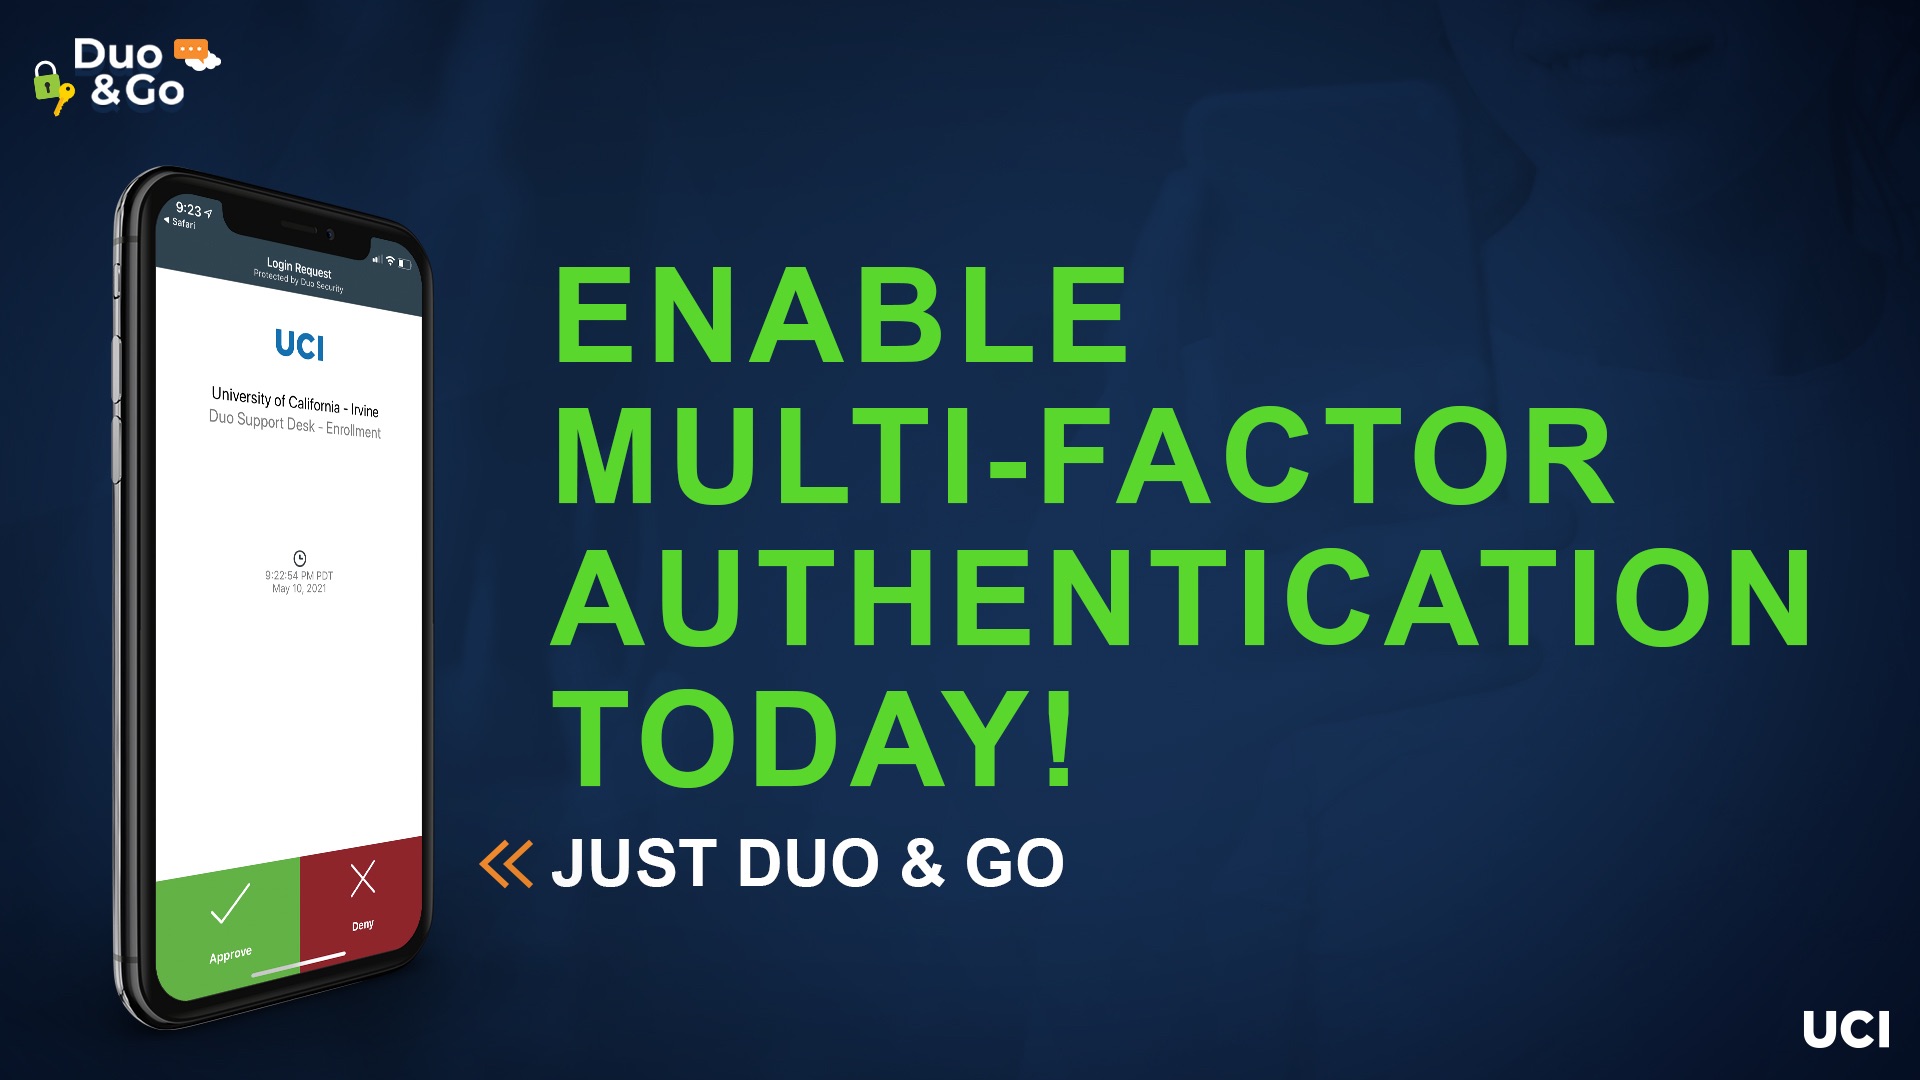 Enable Multifactor Authentication Today! Just Duo & Go